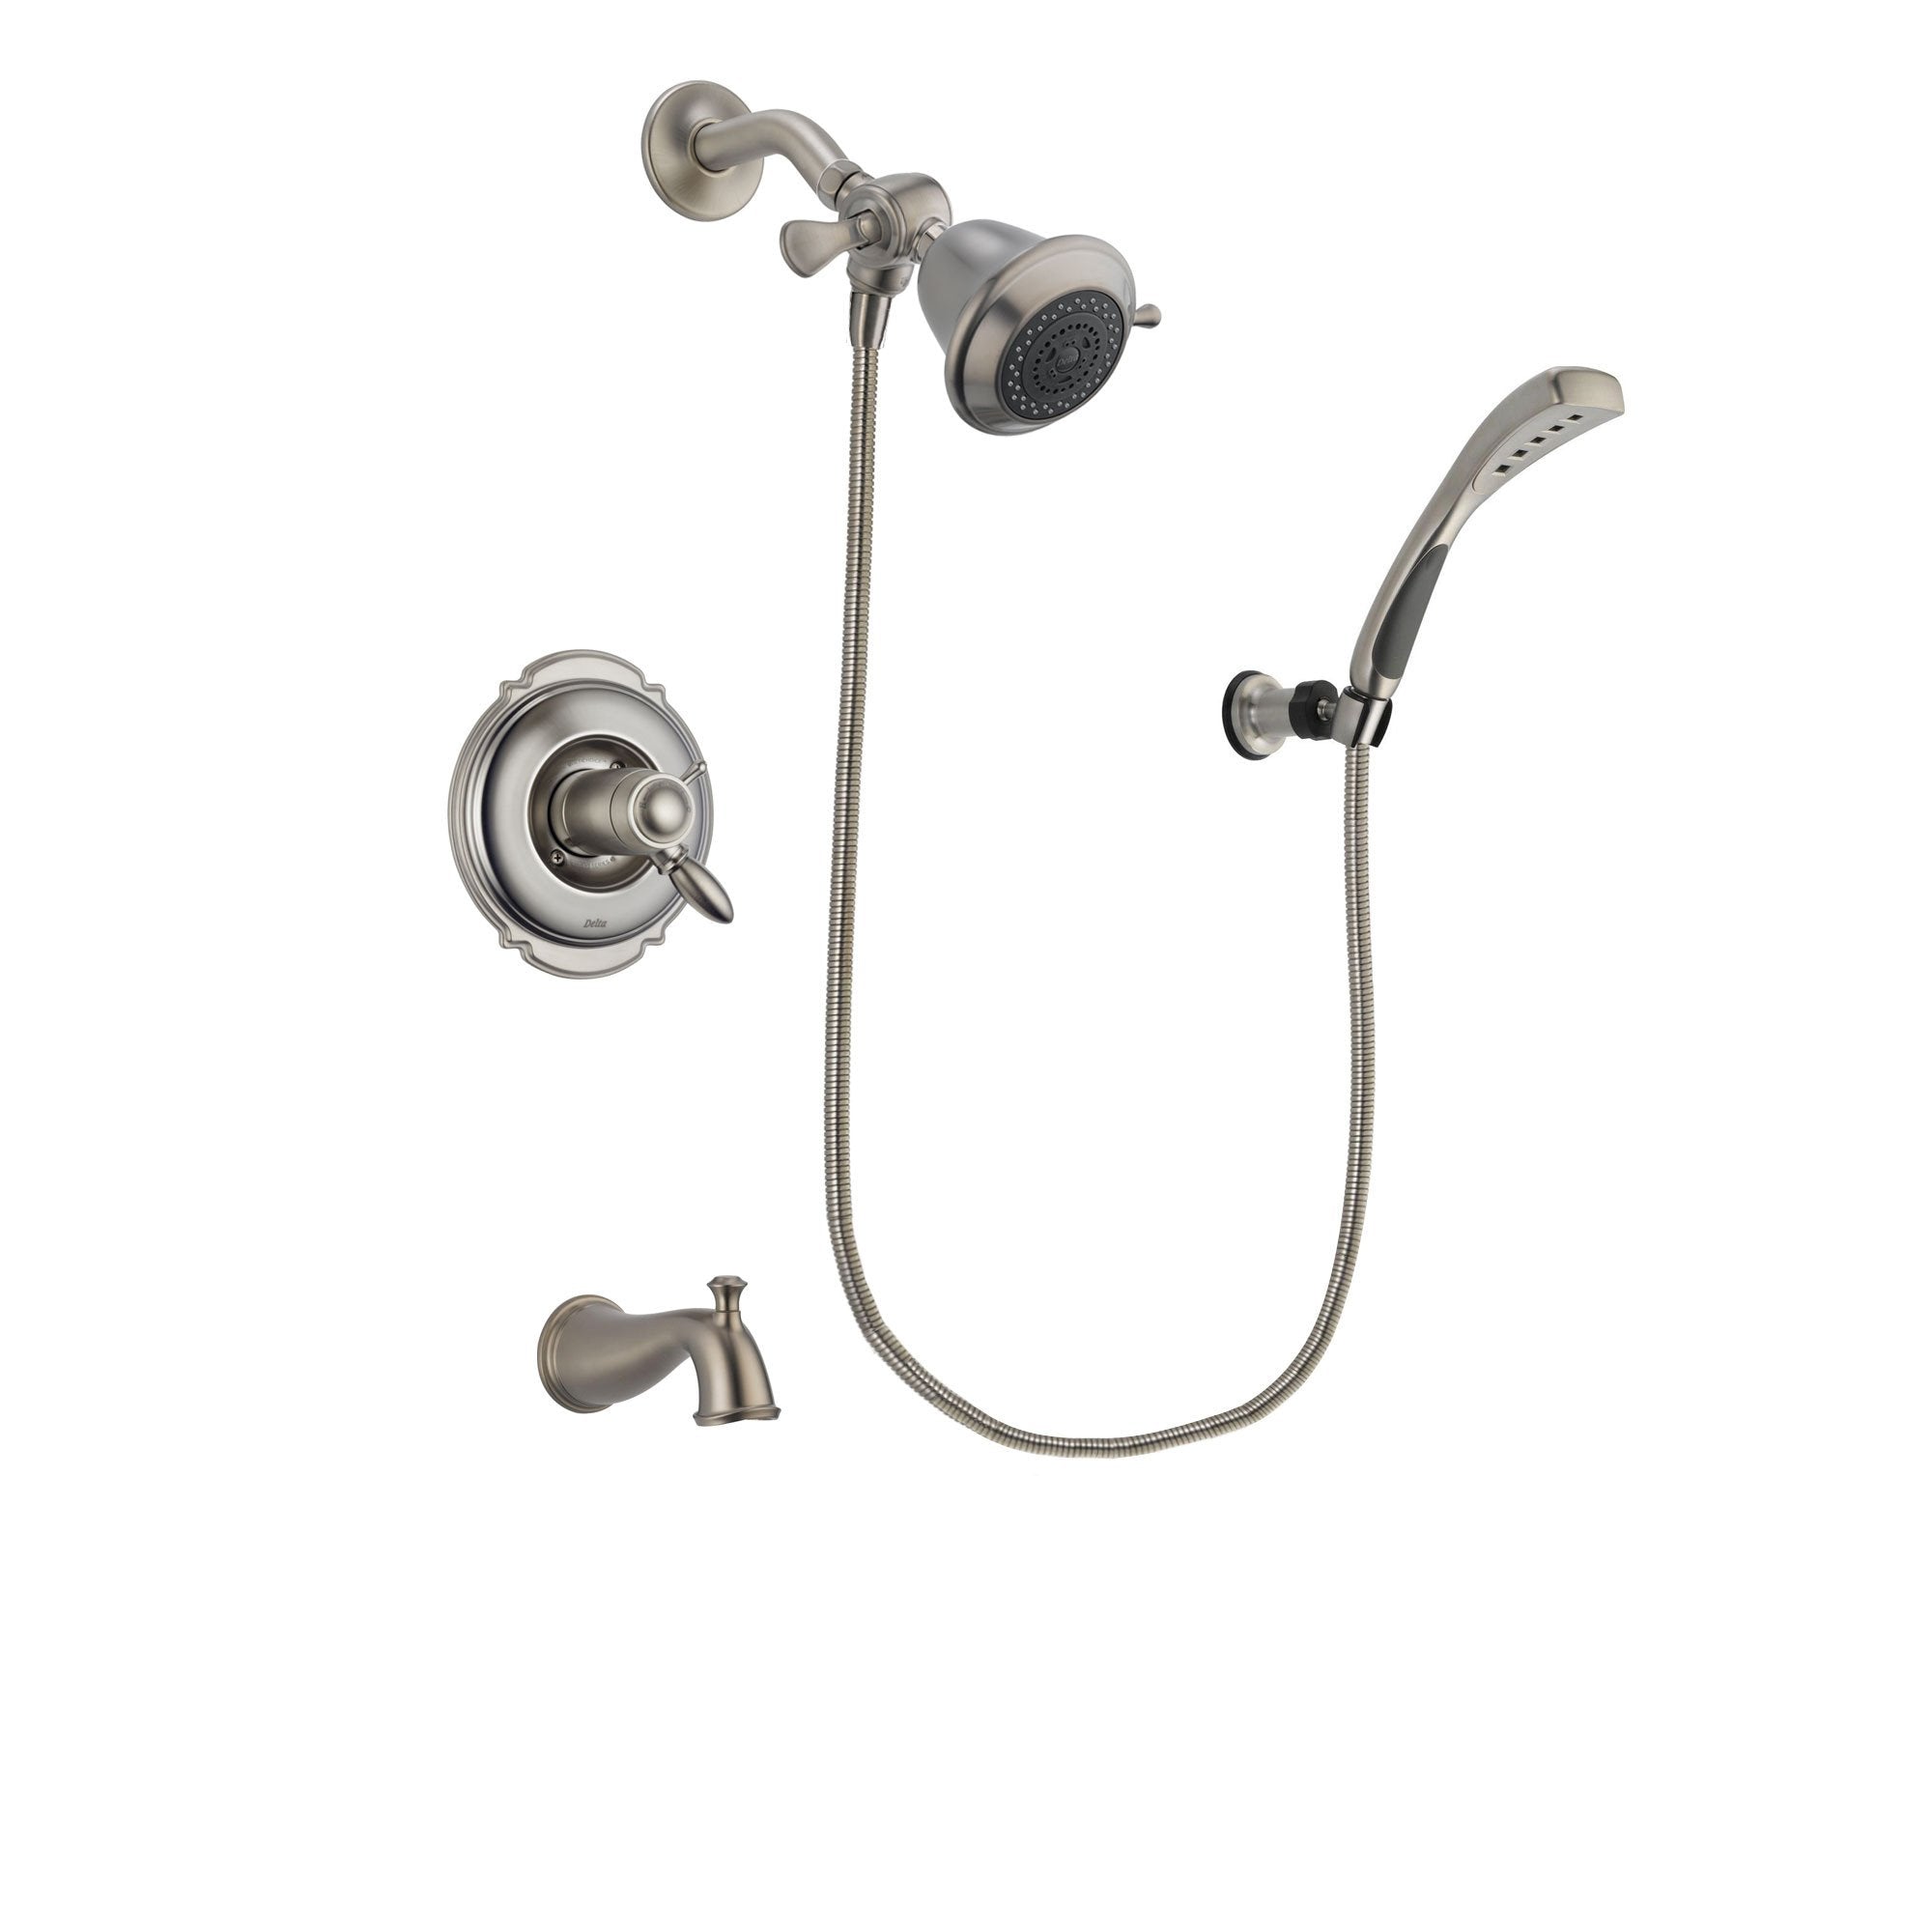 Delta Victorian Stainless Steel Finish Thermostatic Tub and Shower Faucet System Package with Shower Head and Wall Mounted Handshower Includes Rough-in Valve and Tub Spout DSP1787V